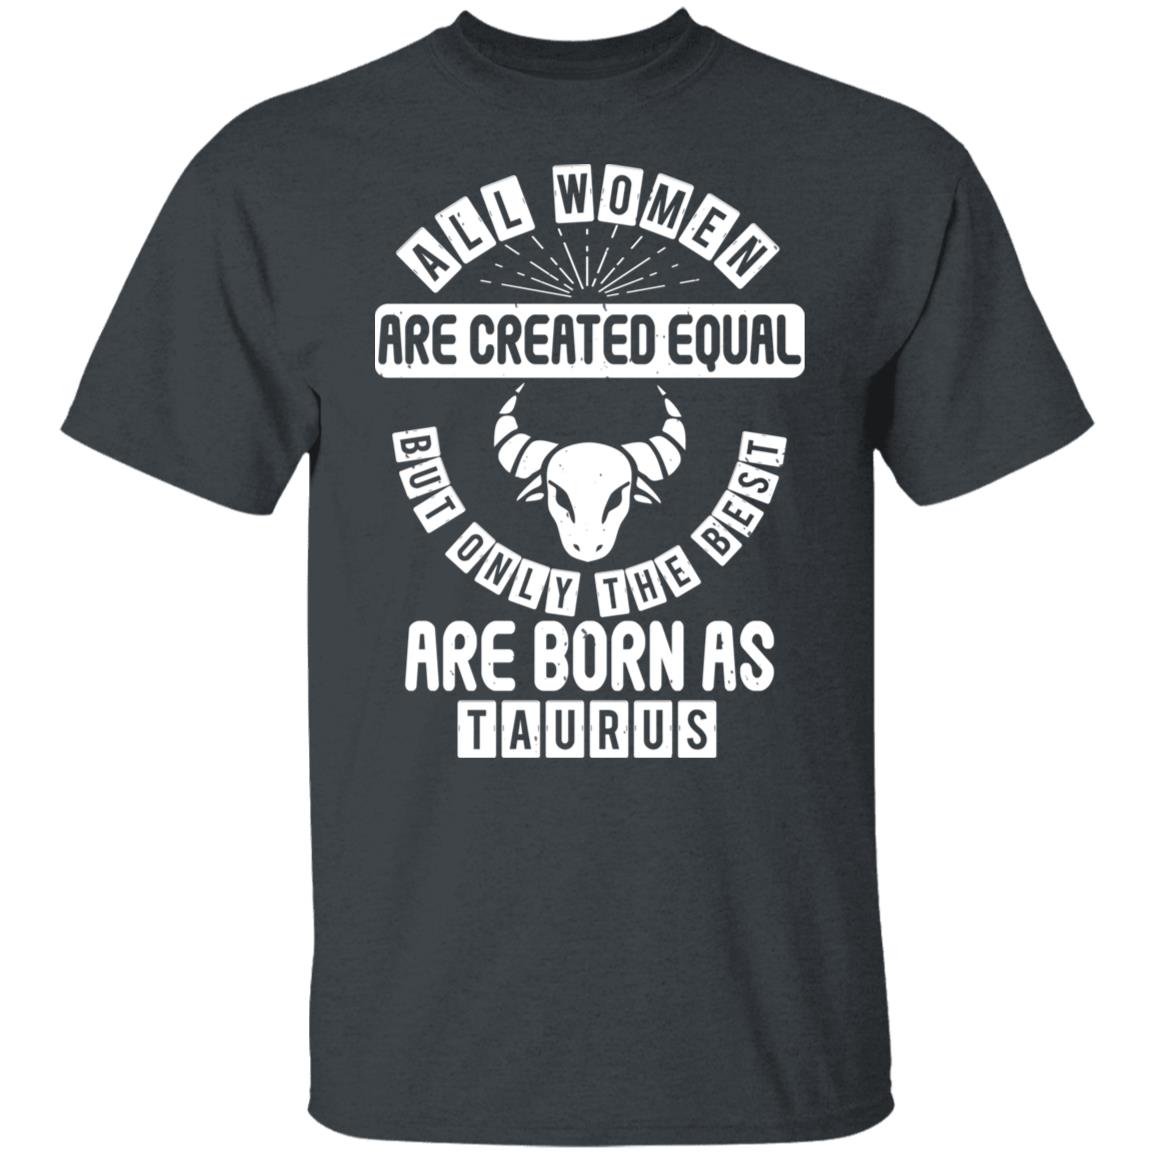 All Women Are Created Equal But Only The Best Are Born as Taurus Zodiac Birthday Gift Shirt